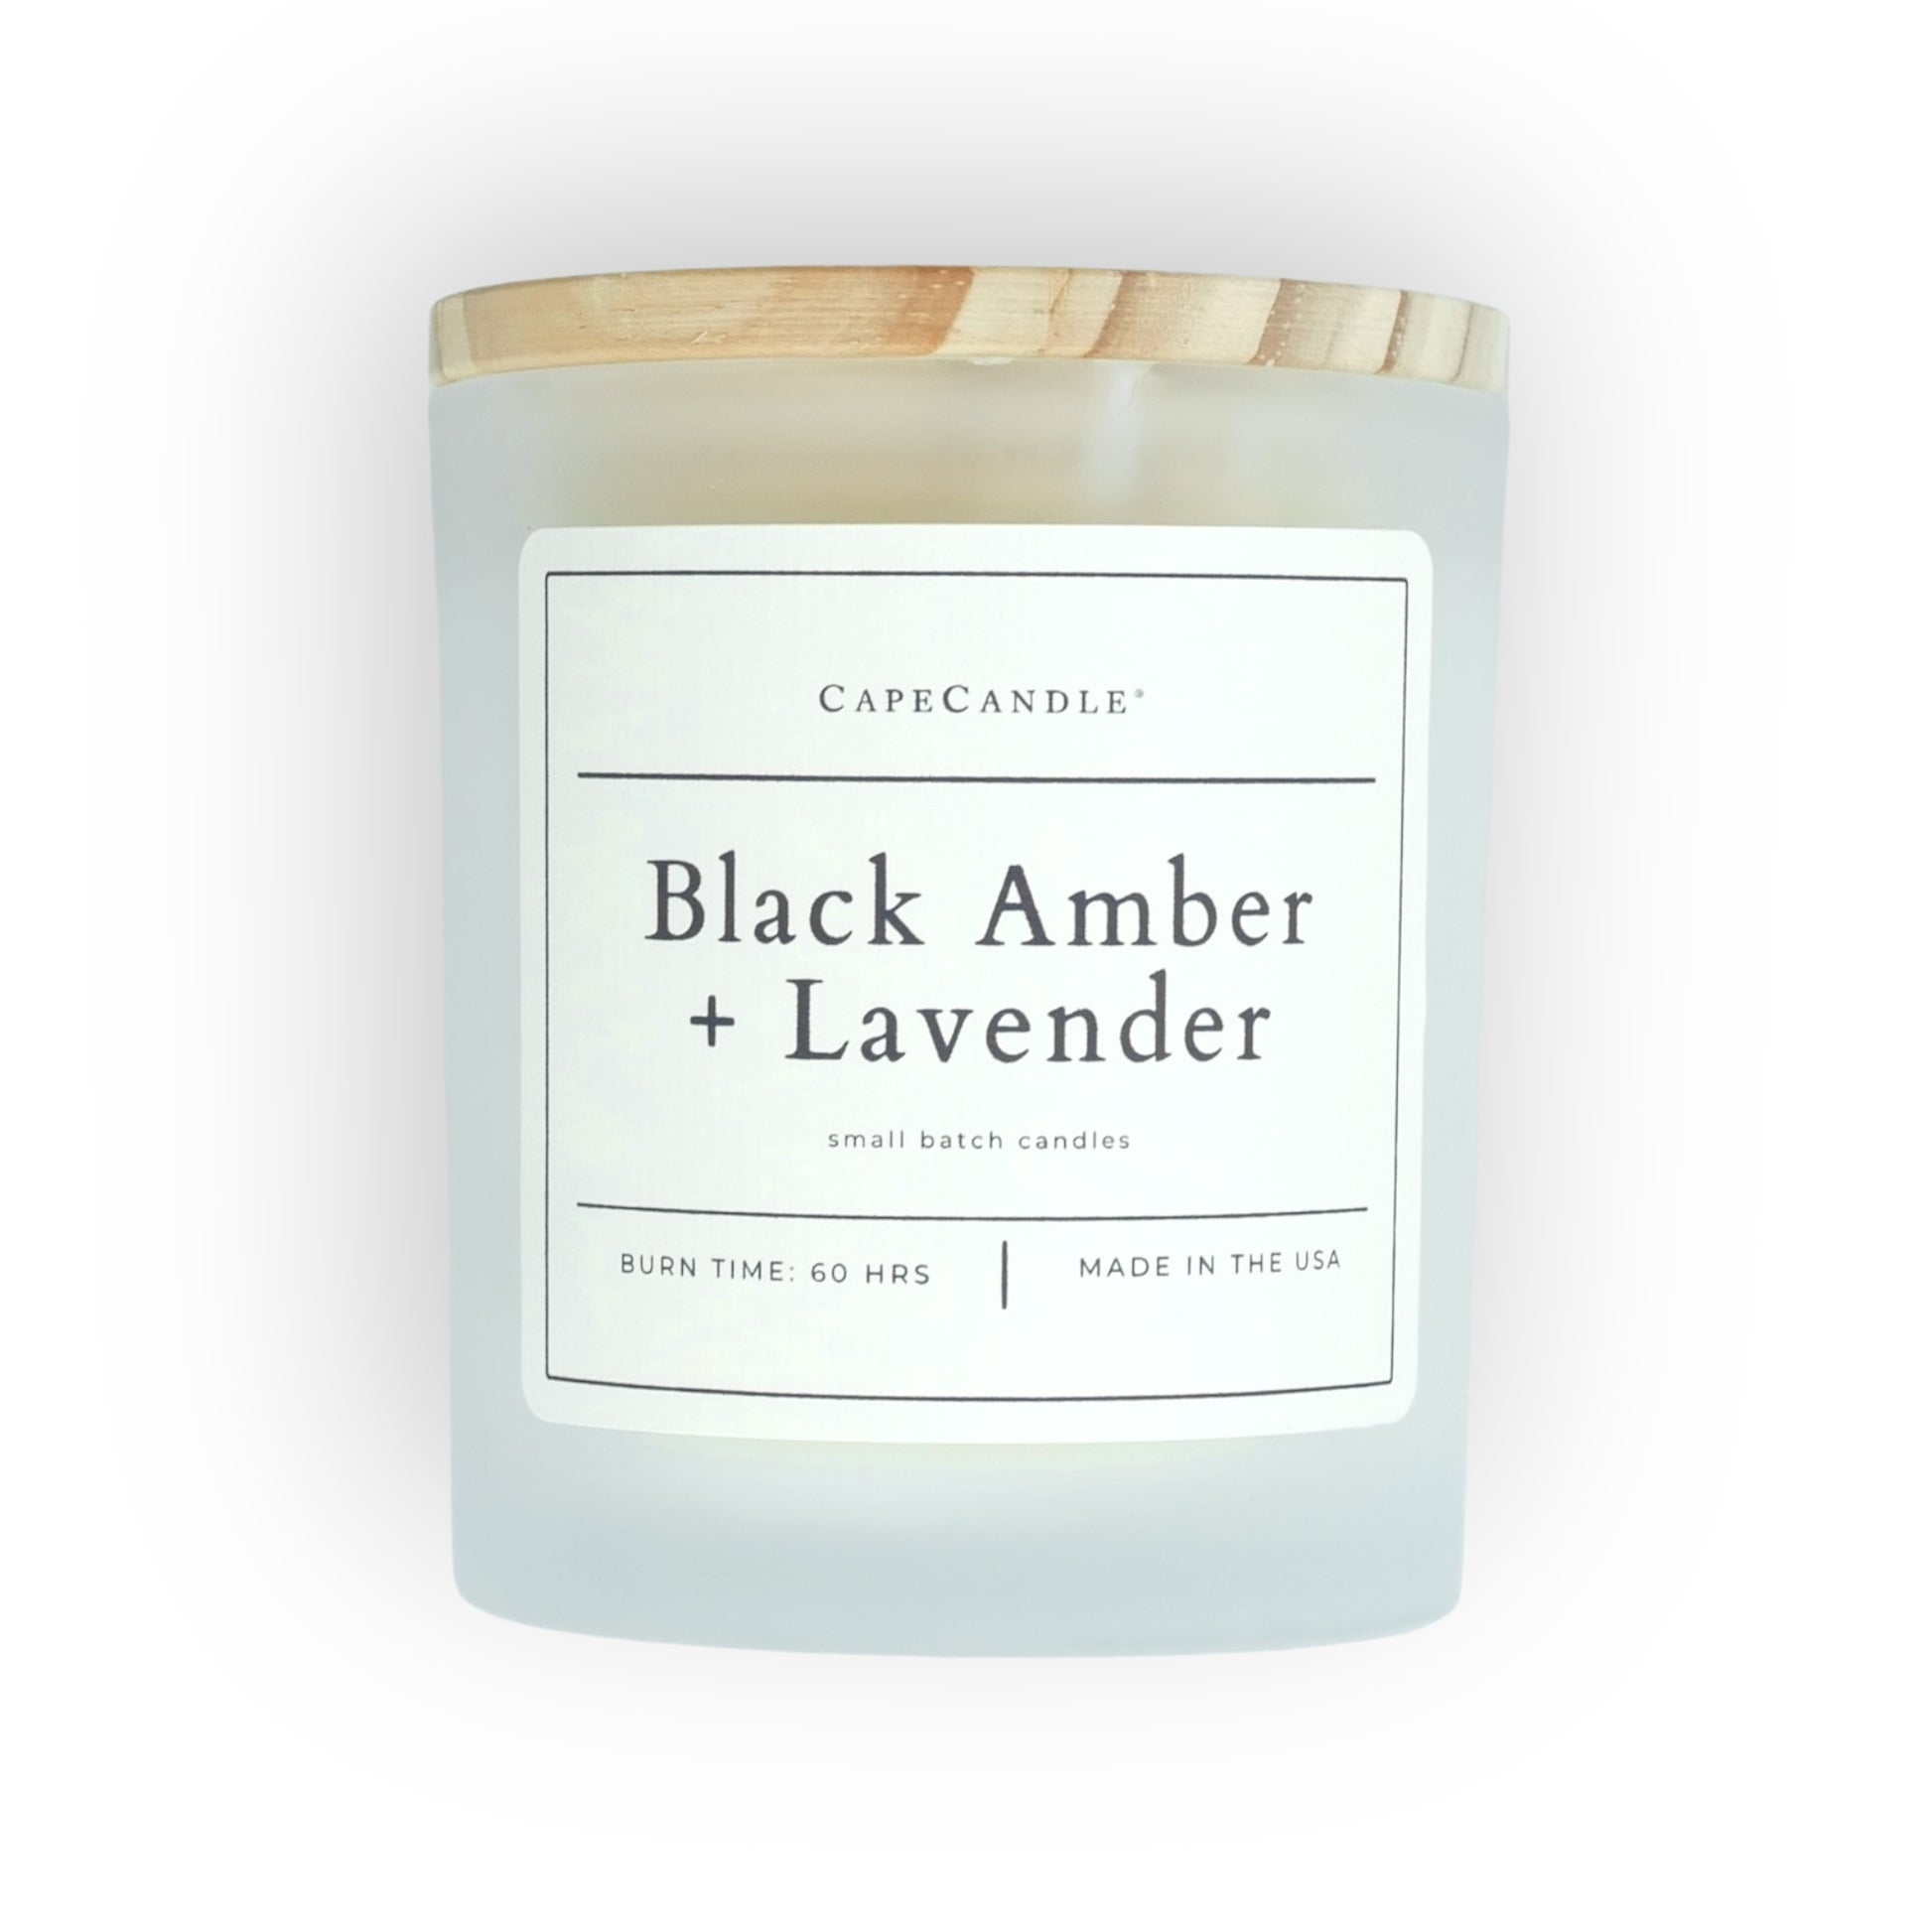 Black Amber + Lavender Small Batch Poured Candle